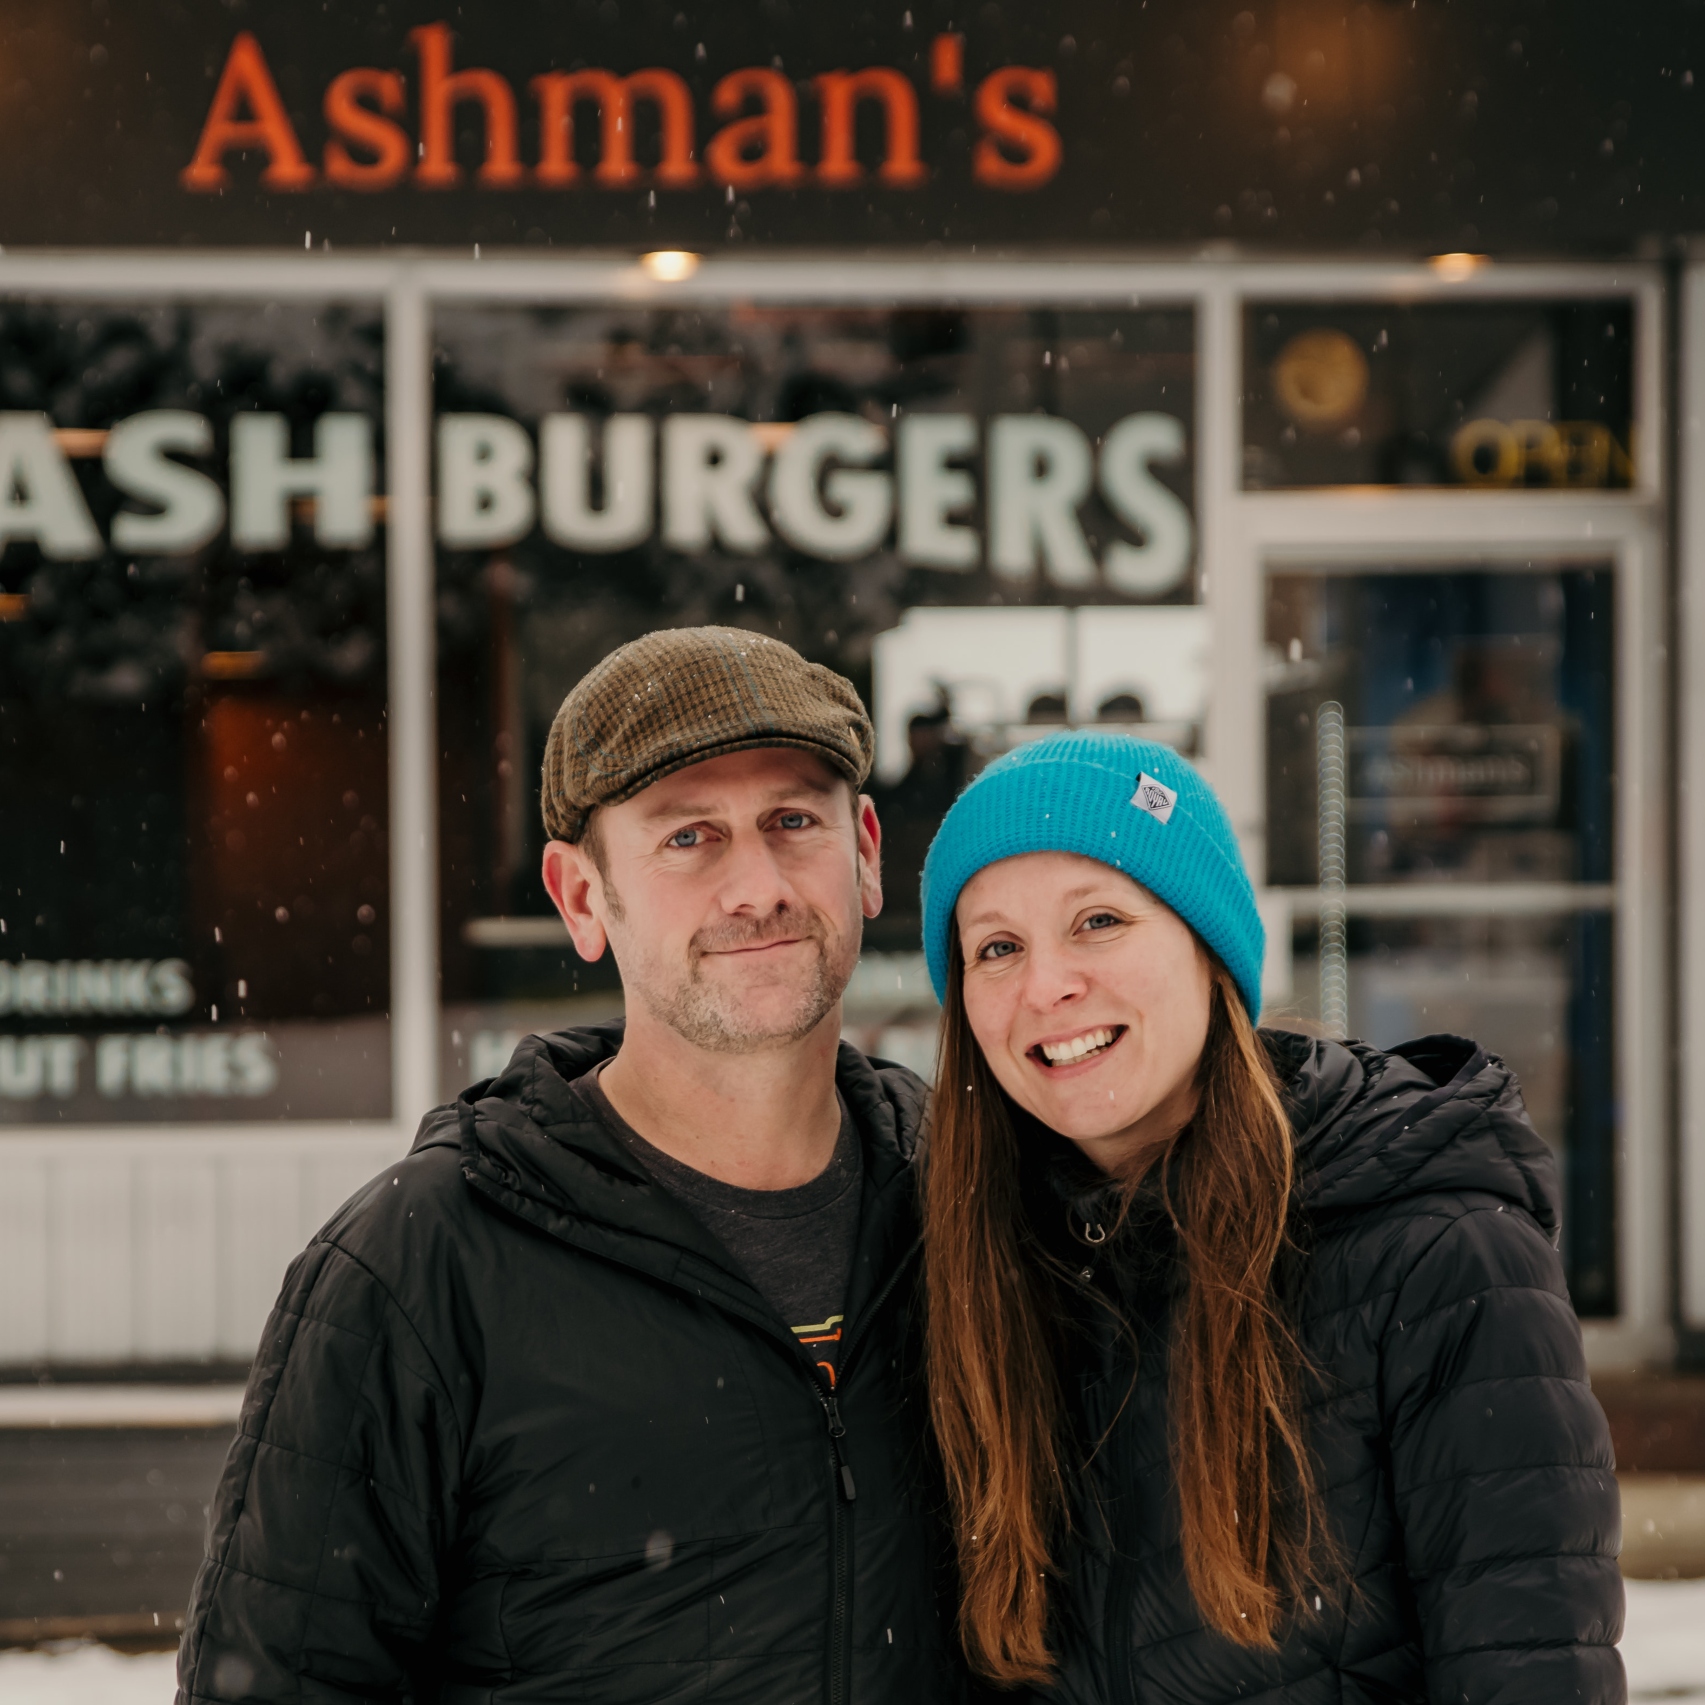 The owners of Ashman's Smash Burgers & Fries 